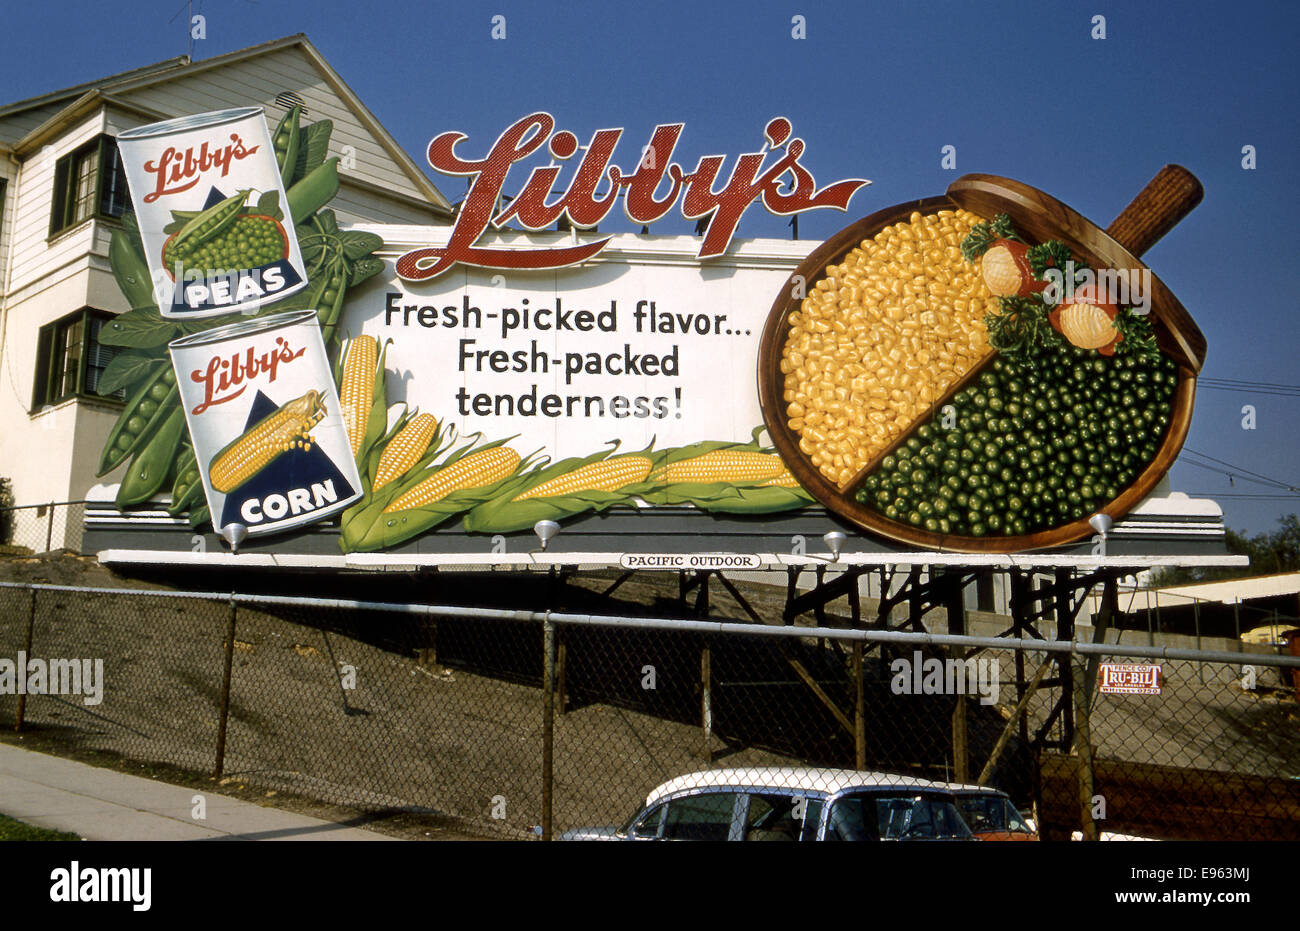 Billboard promoting Libby's canned vegetables circa 1950s Stock Photo